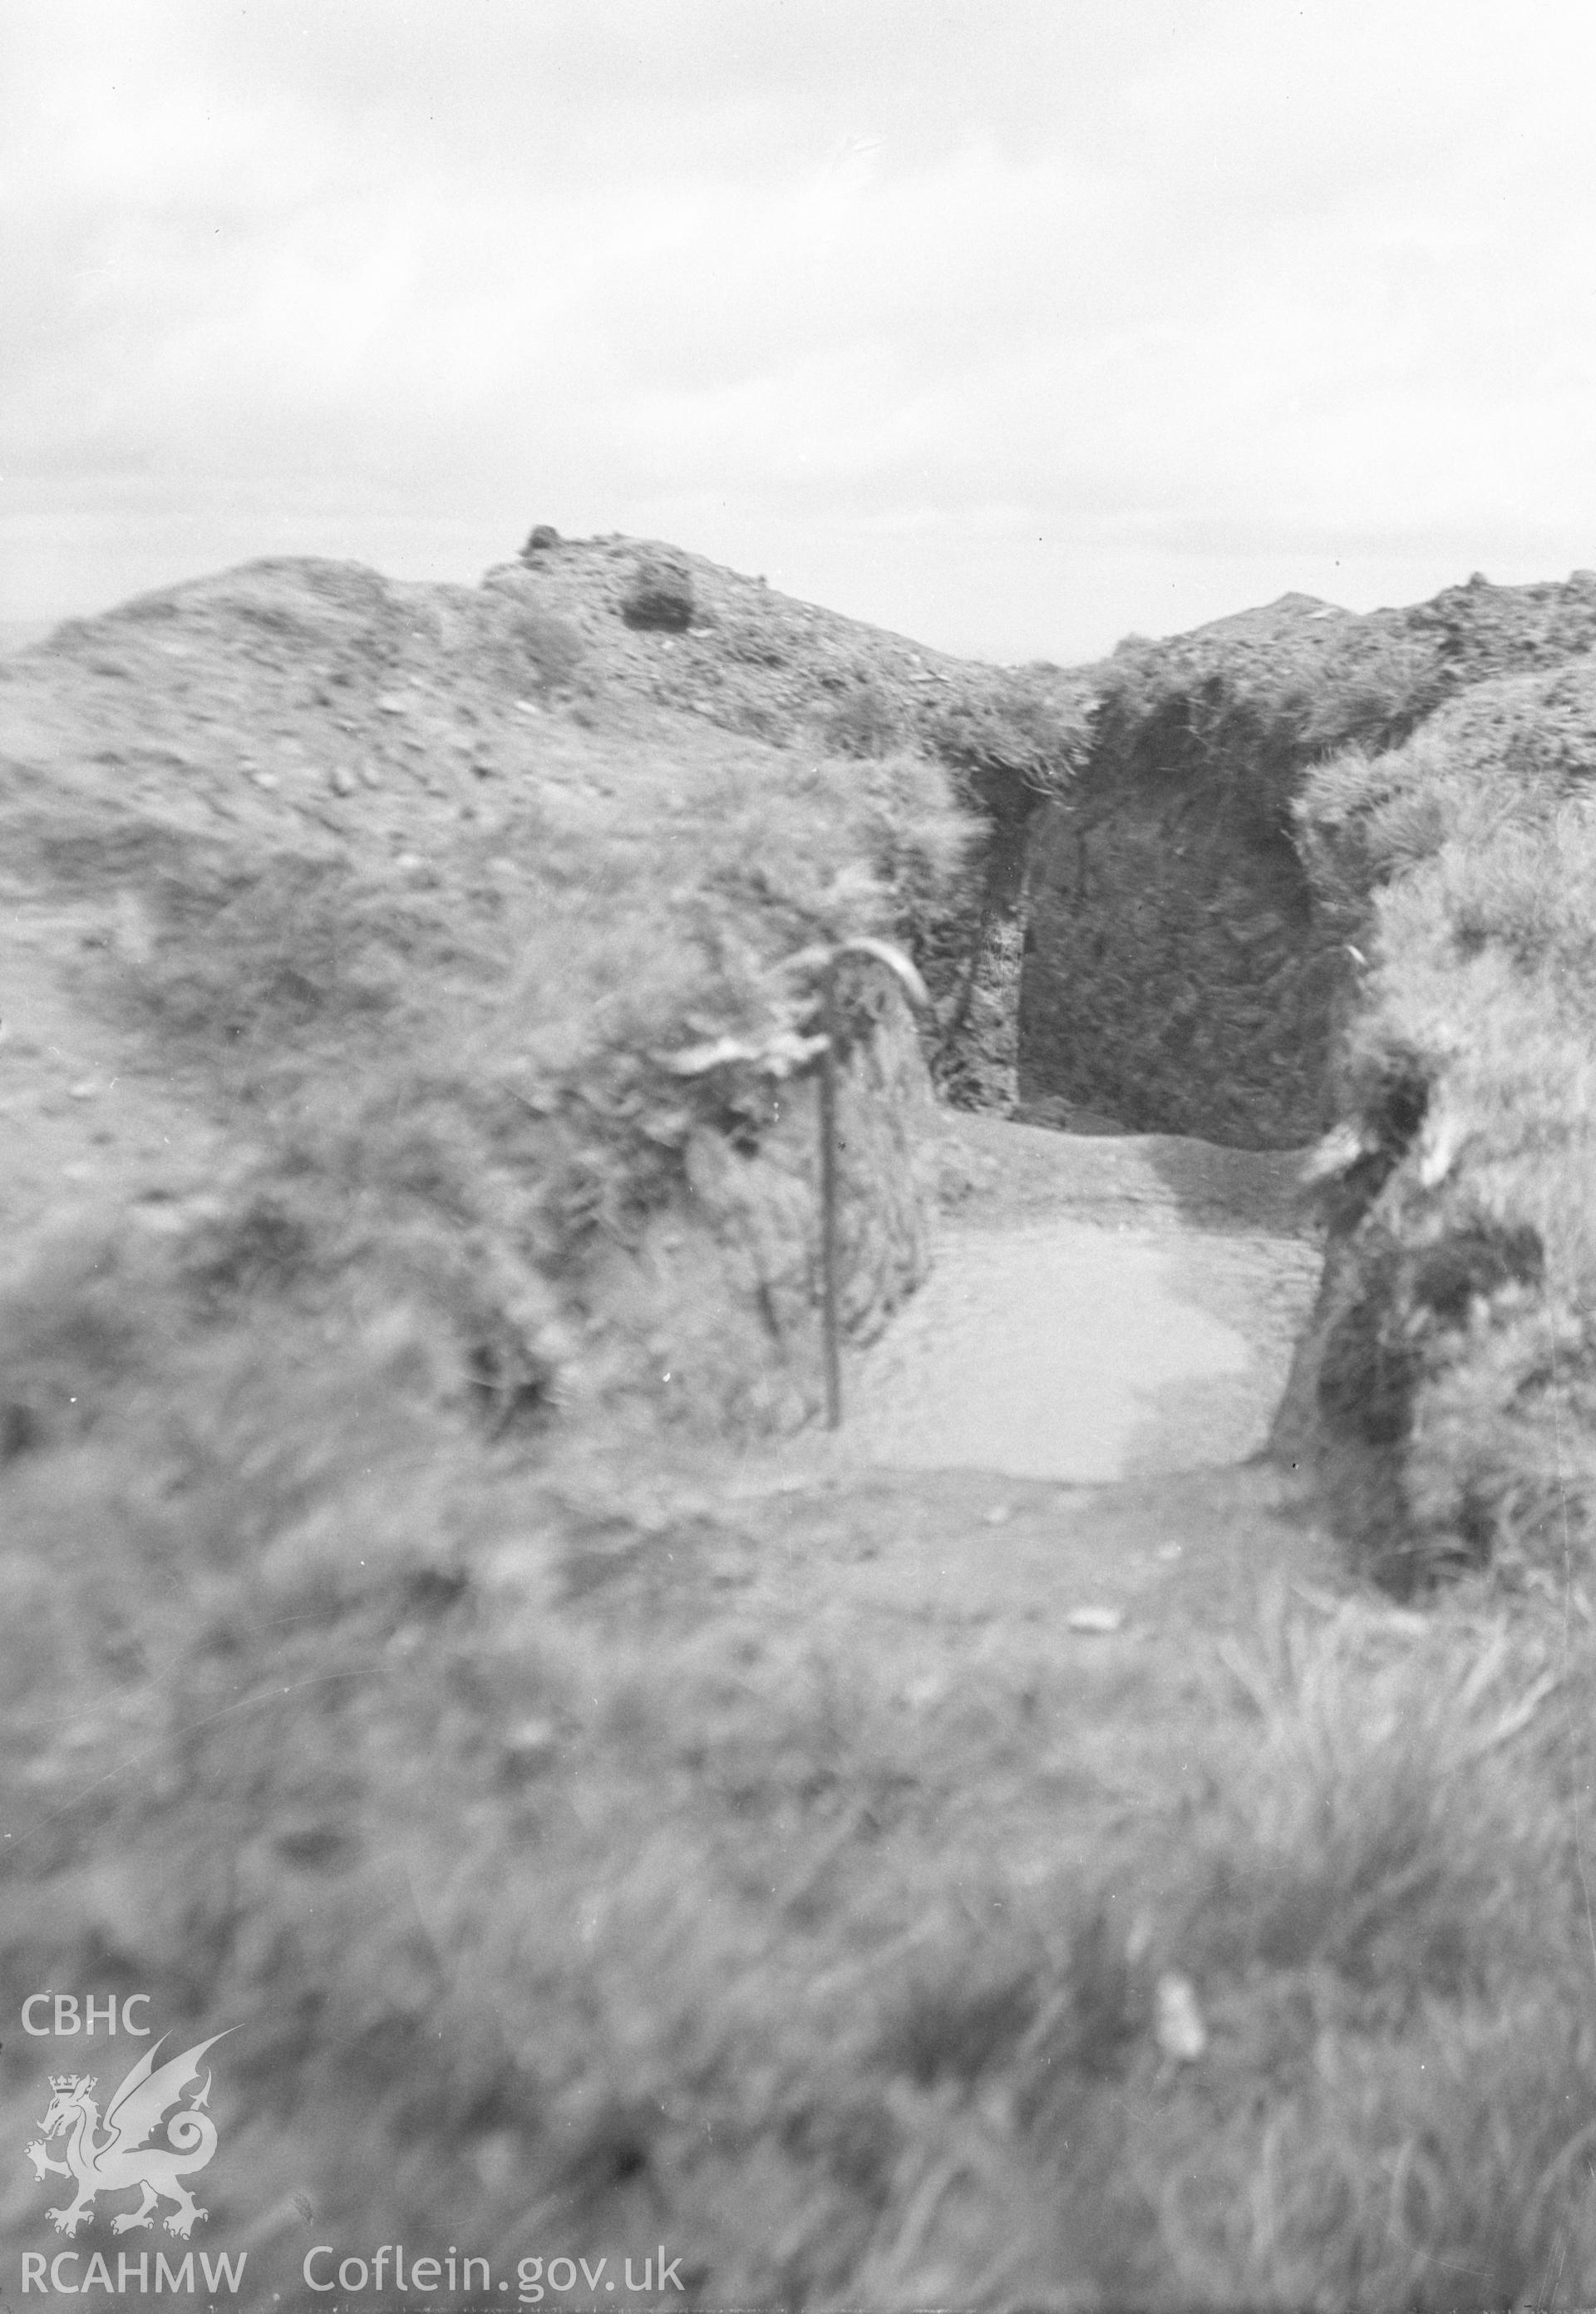 Digital copy of a nitrate negative showing Bryn-y-Fedwen barrow, Cadfarch. From the Cadw Monuments in Care Collection.